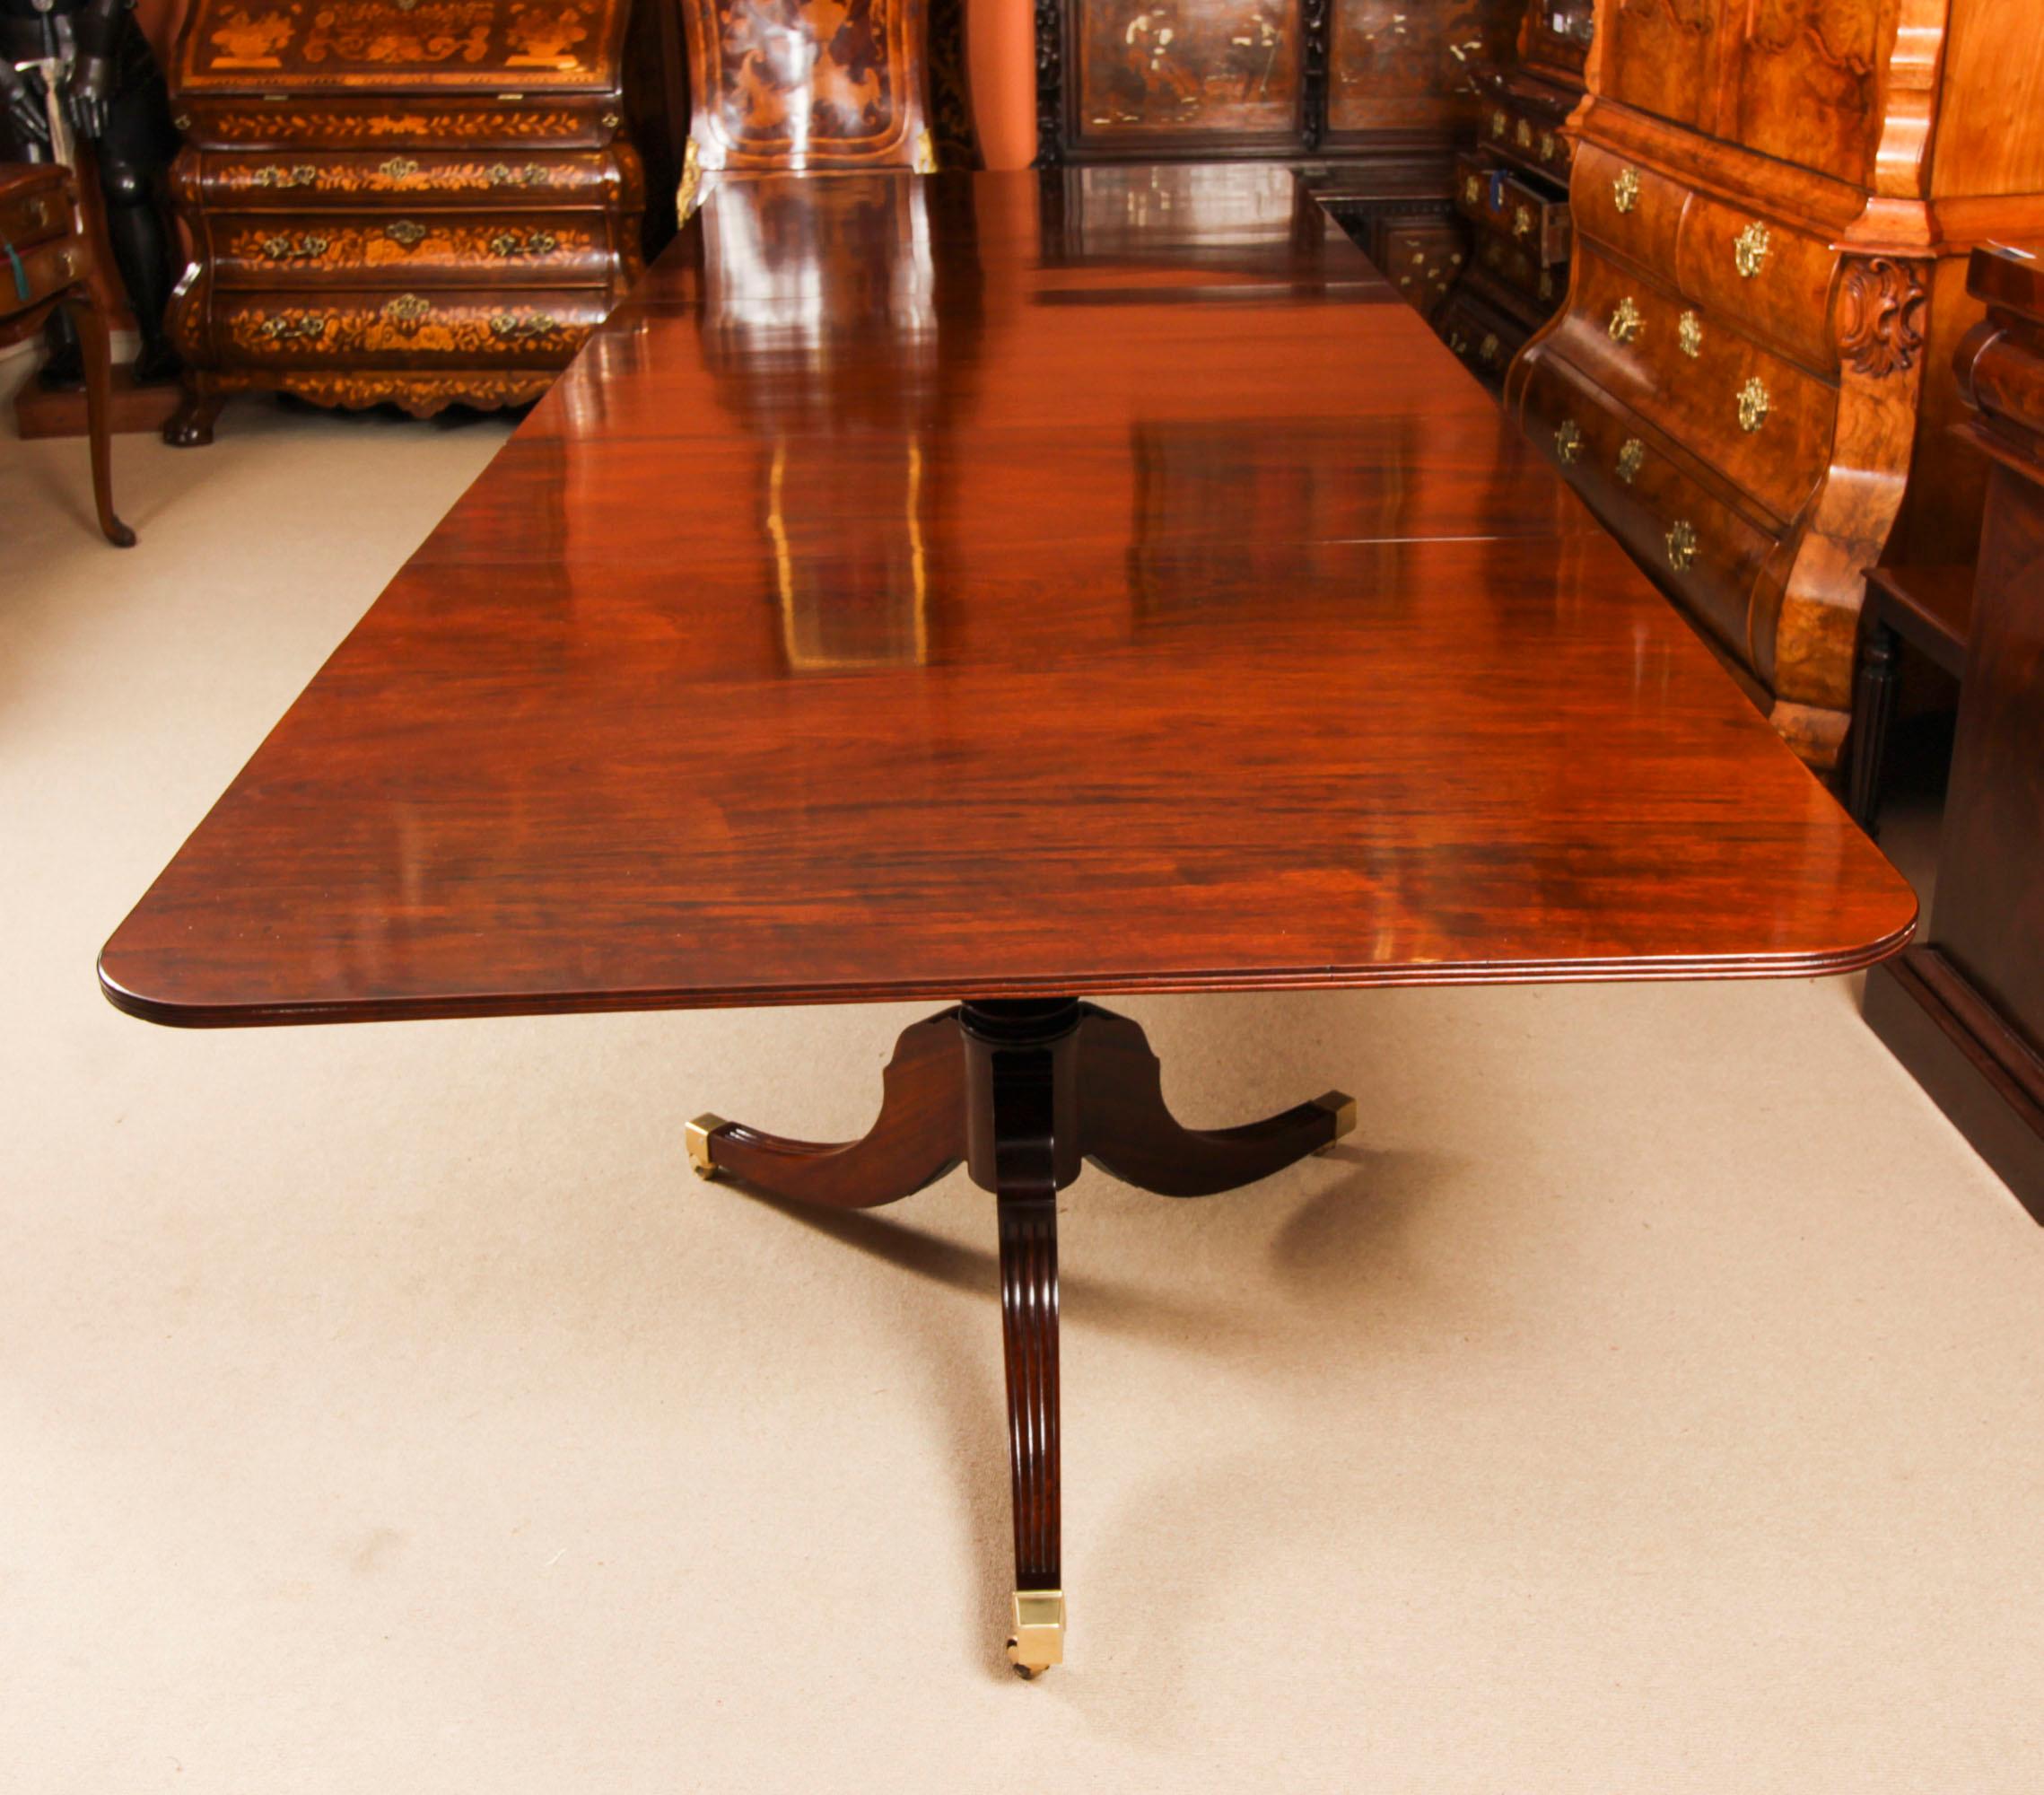 Antique 14ft Flame Mahogany Regency Revival Triple Pillar Dining Table 19th C For Sale 8